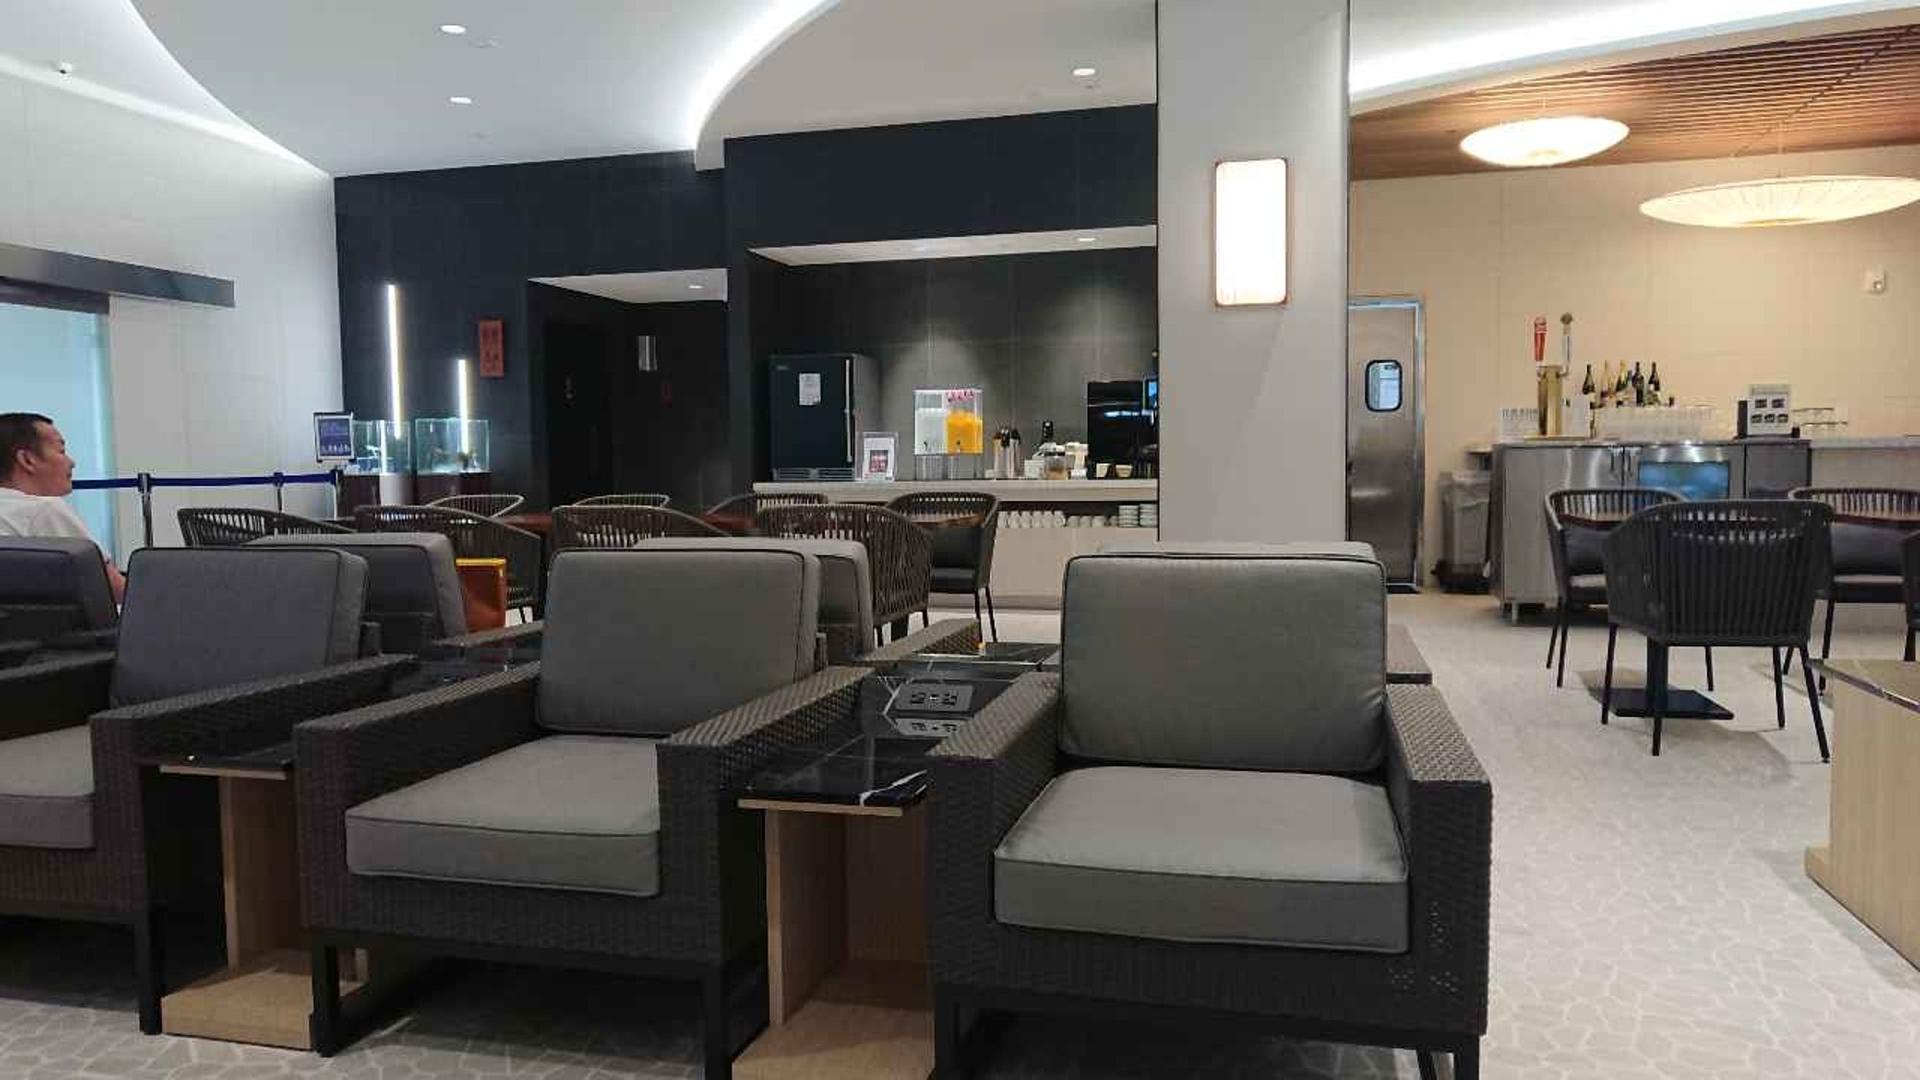 All Nippon Airways ANA Suite Lounge image 2 of 6